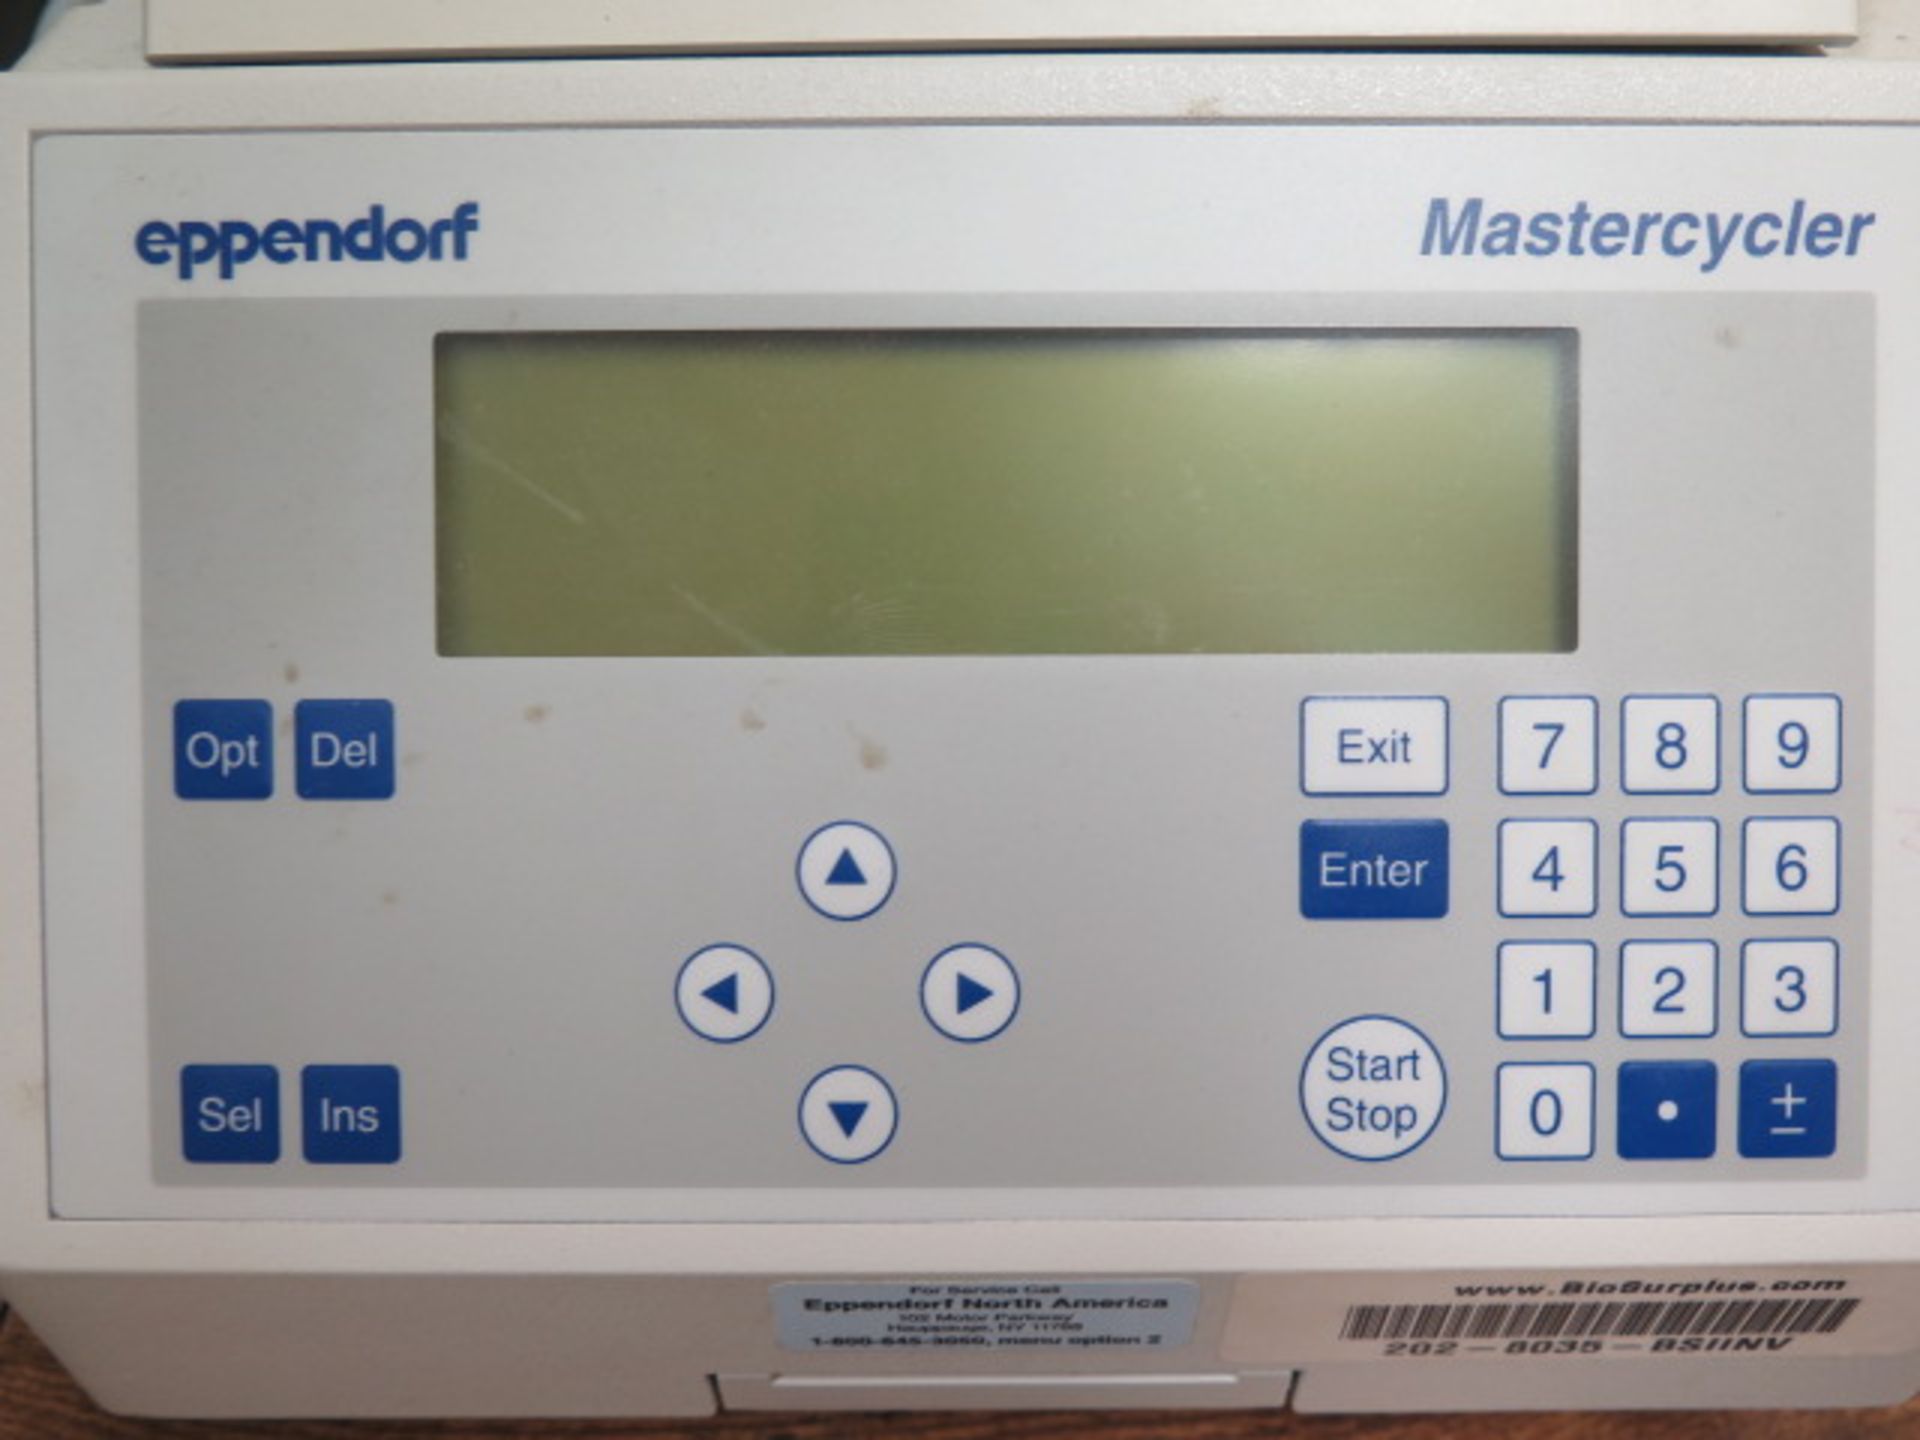 Eppendorf “Mastercycler” Thermocycler (SOLD AS-IS - NO WARRANTY) - Image 5 of 6